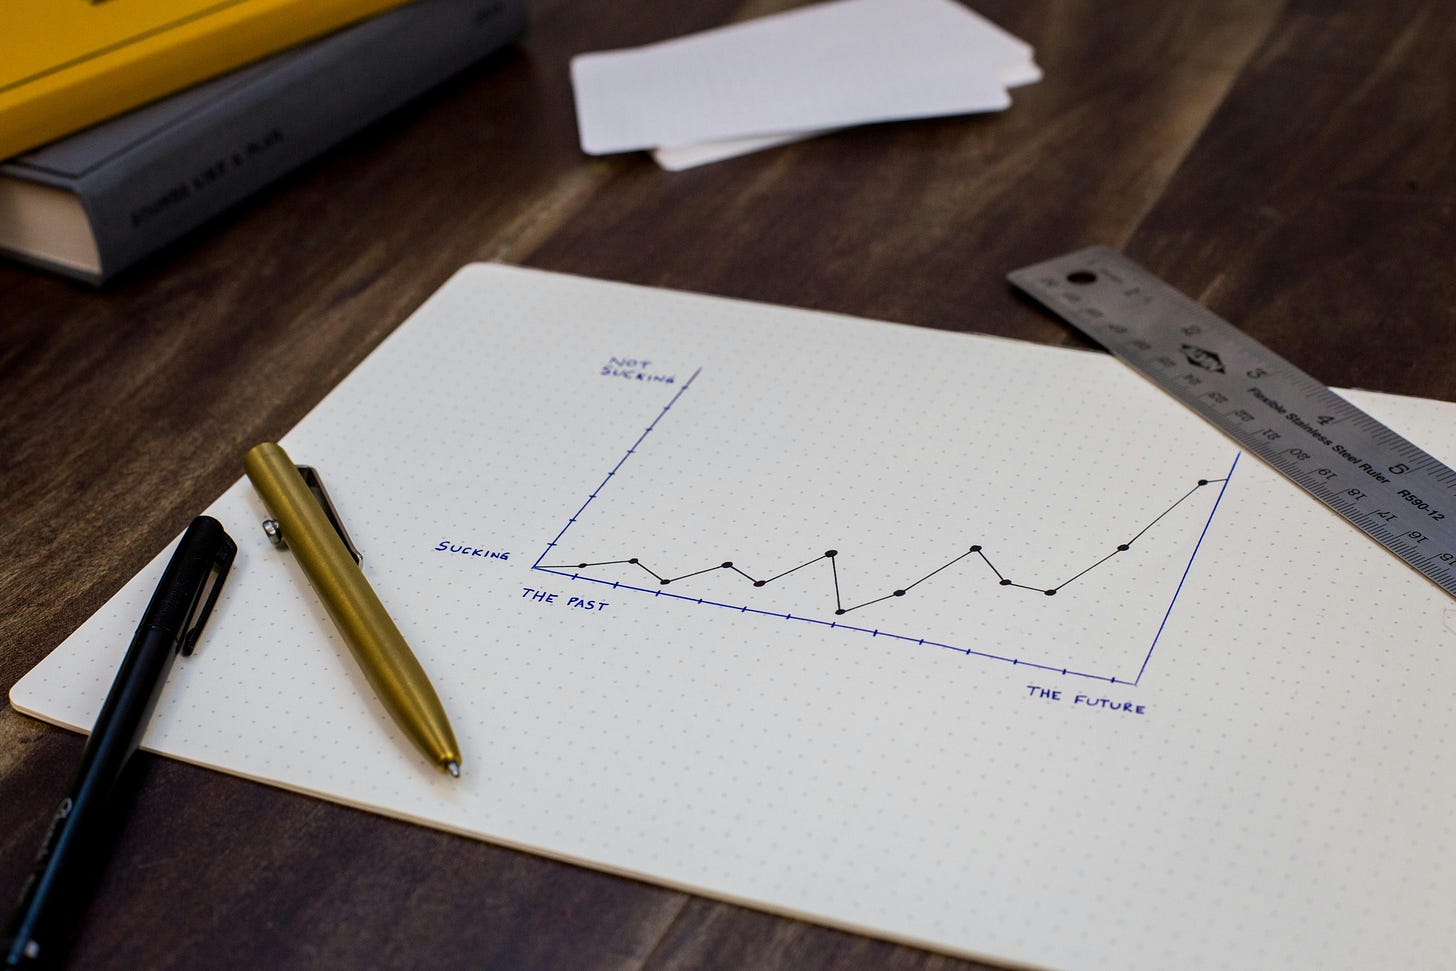 Desk with pens, ruler, and paper with a graph. Graph's y-axis is labeled 'not sucking' and 'sucking'. X-axis is labeled 'the past' and 'the future'. The graph has some dips, but ultimately ends with an upward trend.